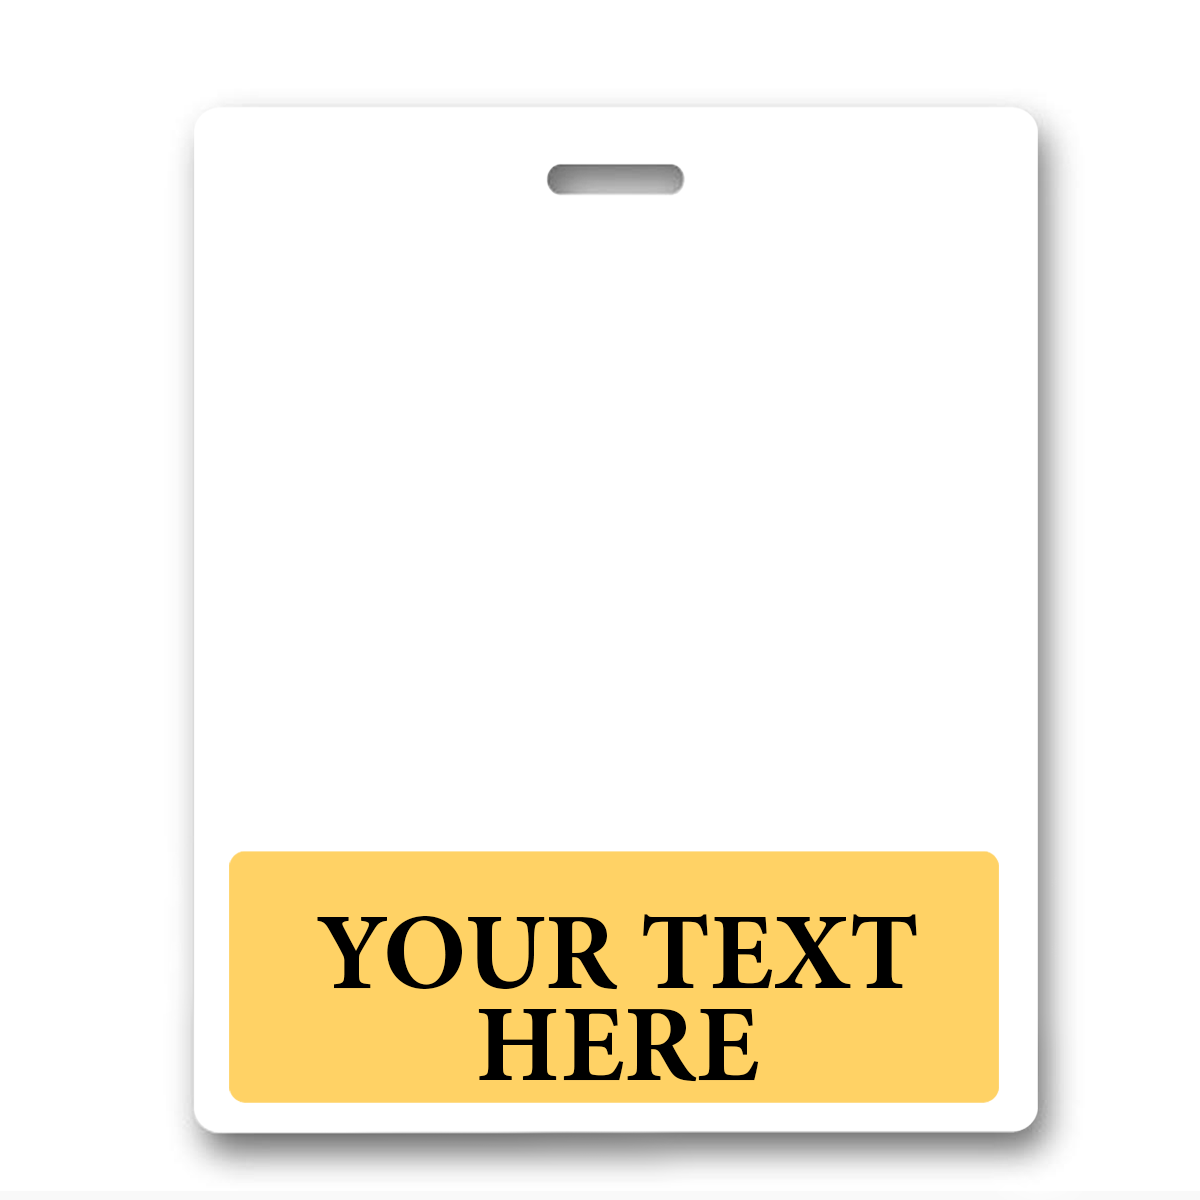 A white blank ID card with a yellow bottom section that says "YOUR TEXT HERE." The Oversized Custom Printed Horizontal XL Badge Buddy (Extra Large Size) has a slot at the top for attaching a lanyard.